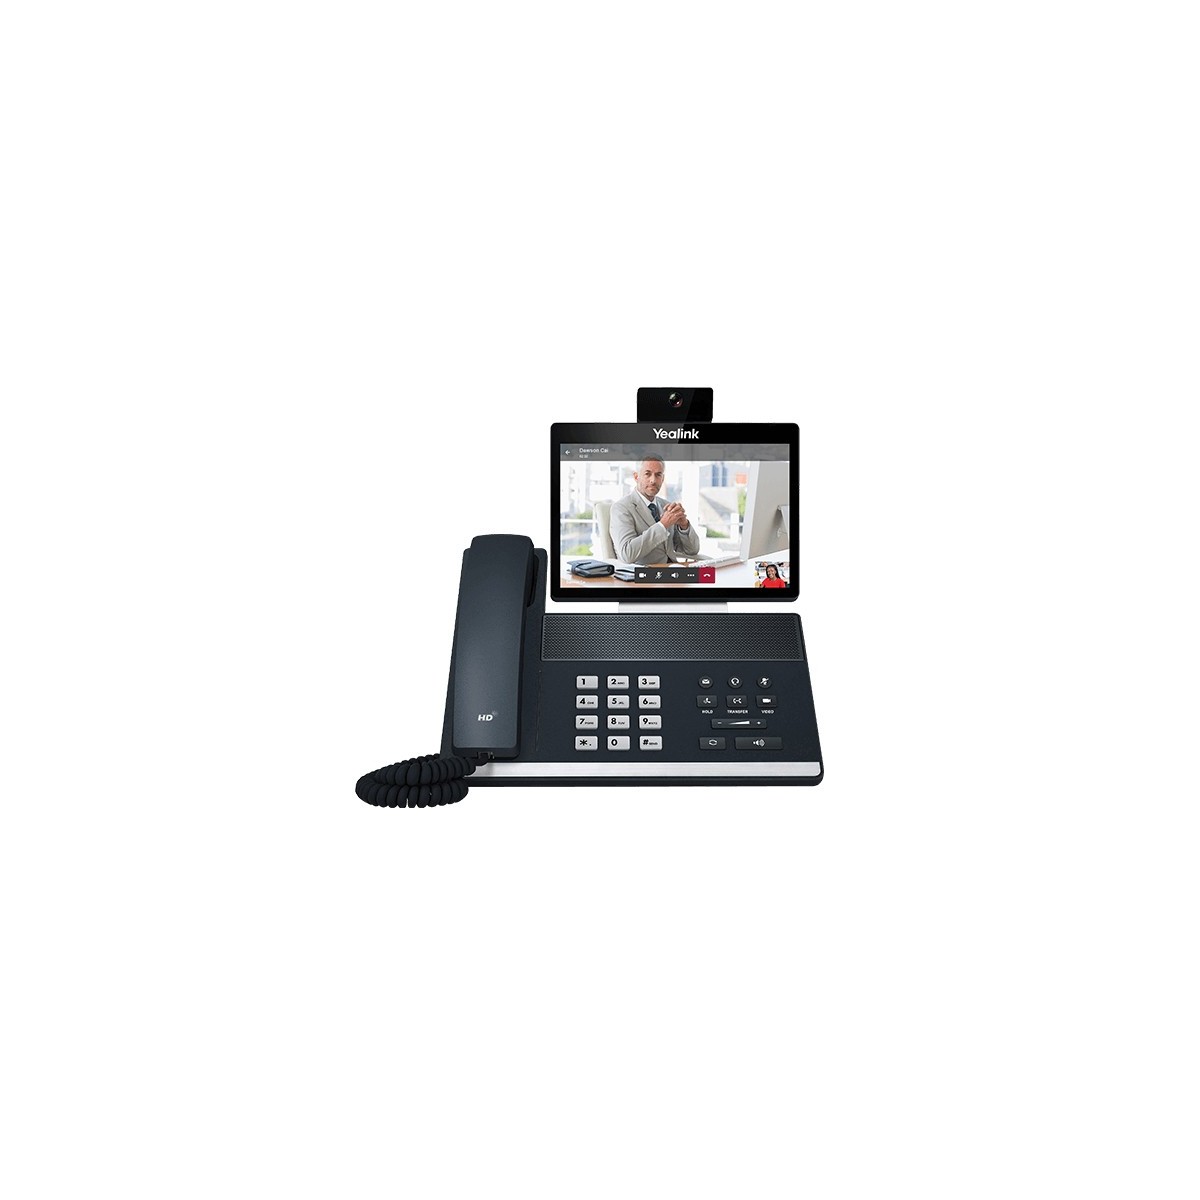 Yealink Teams Edition VP59 High-End - VoIP-Telefon - Voice-Over-IP